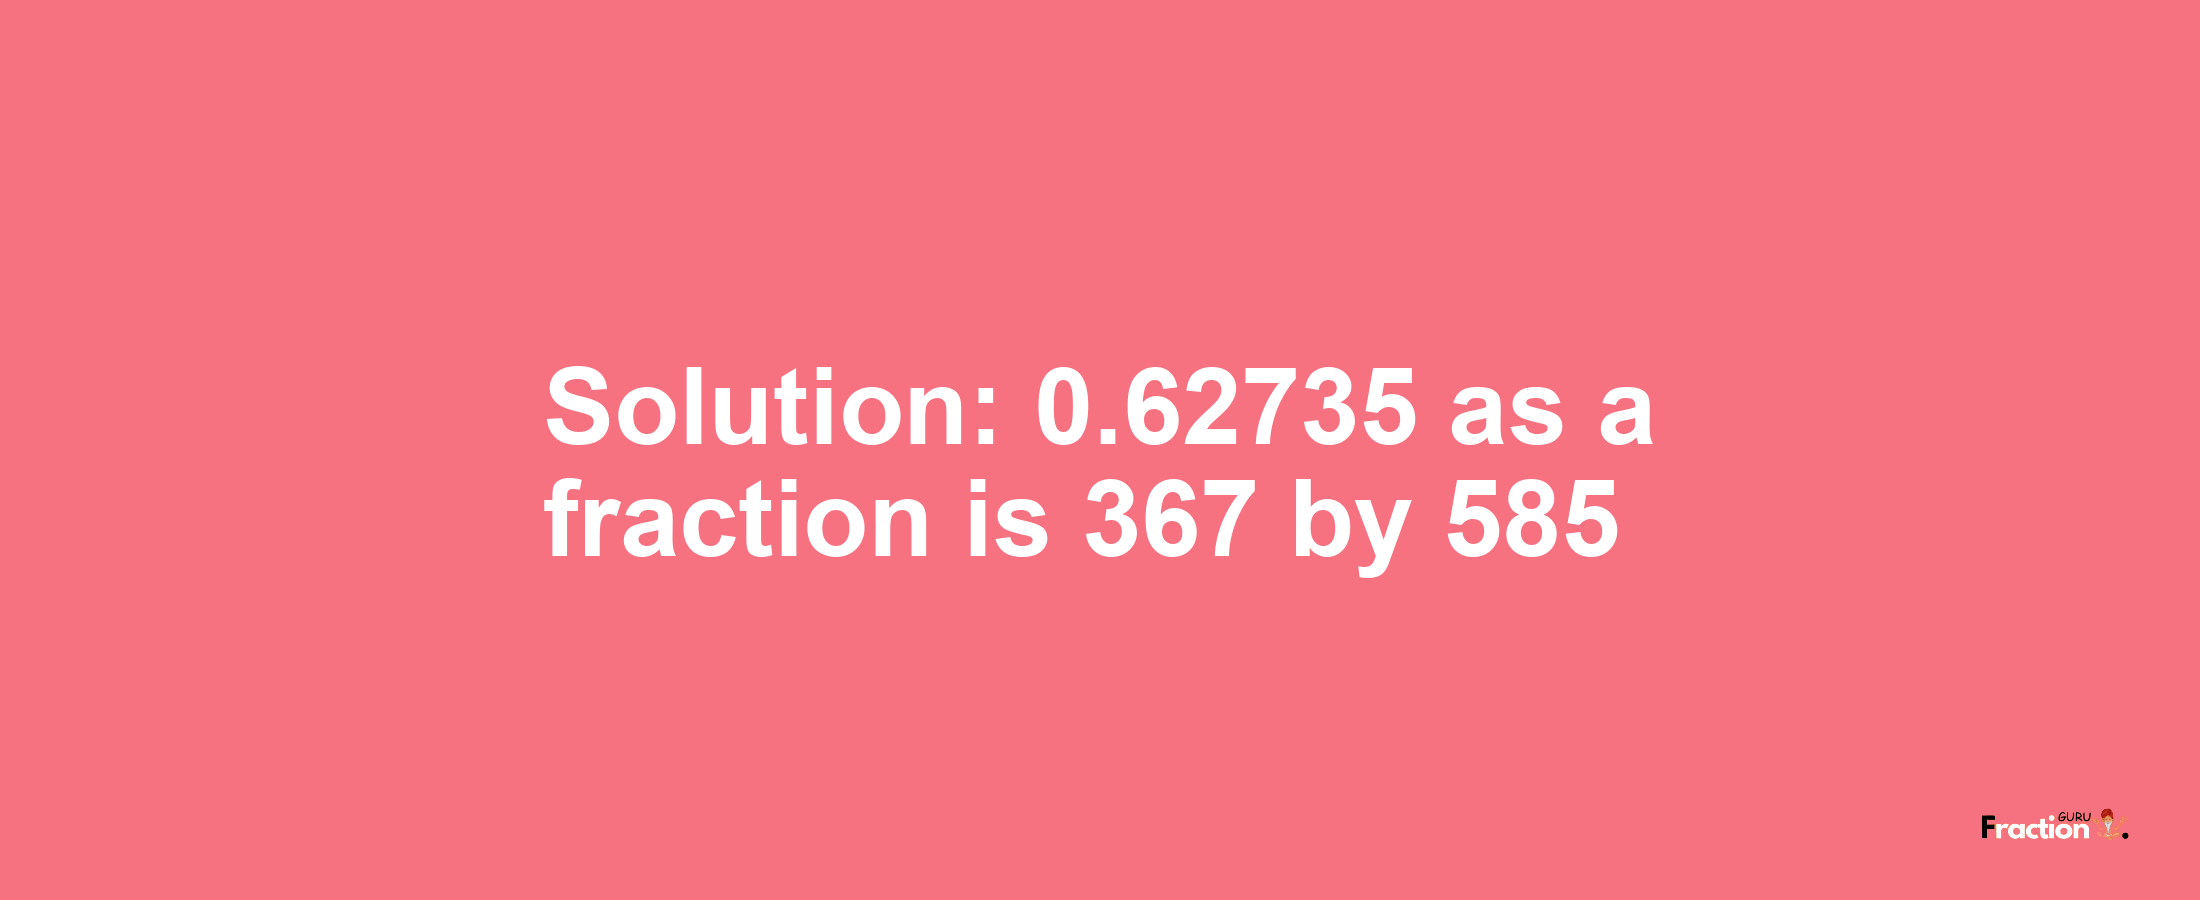 Solution:0.62735 as a fraction is 367/585